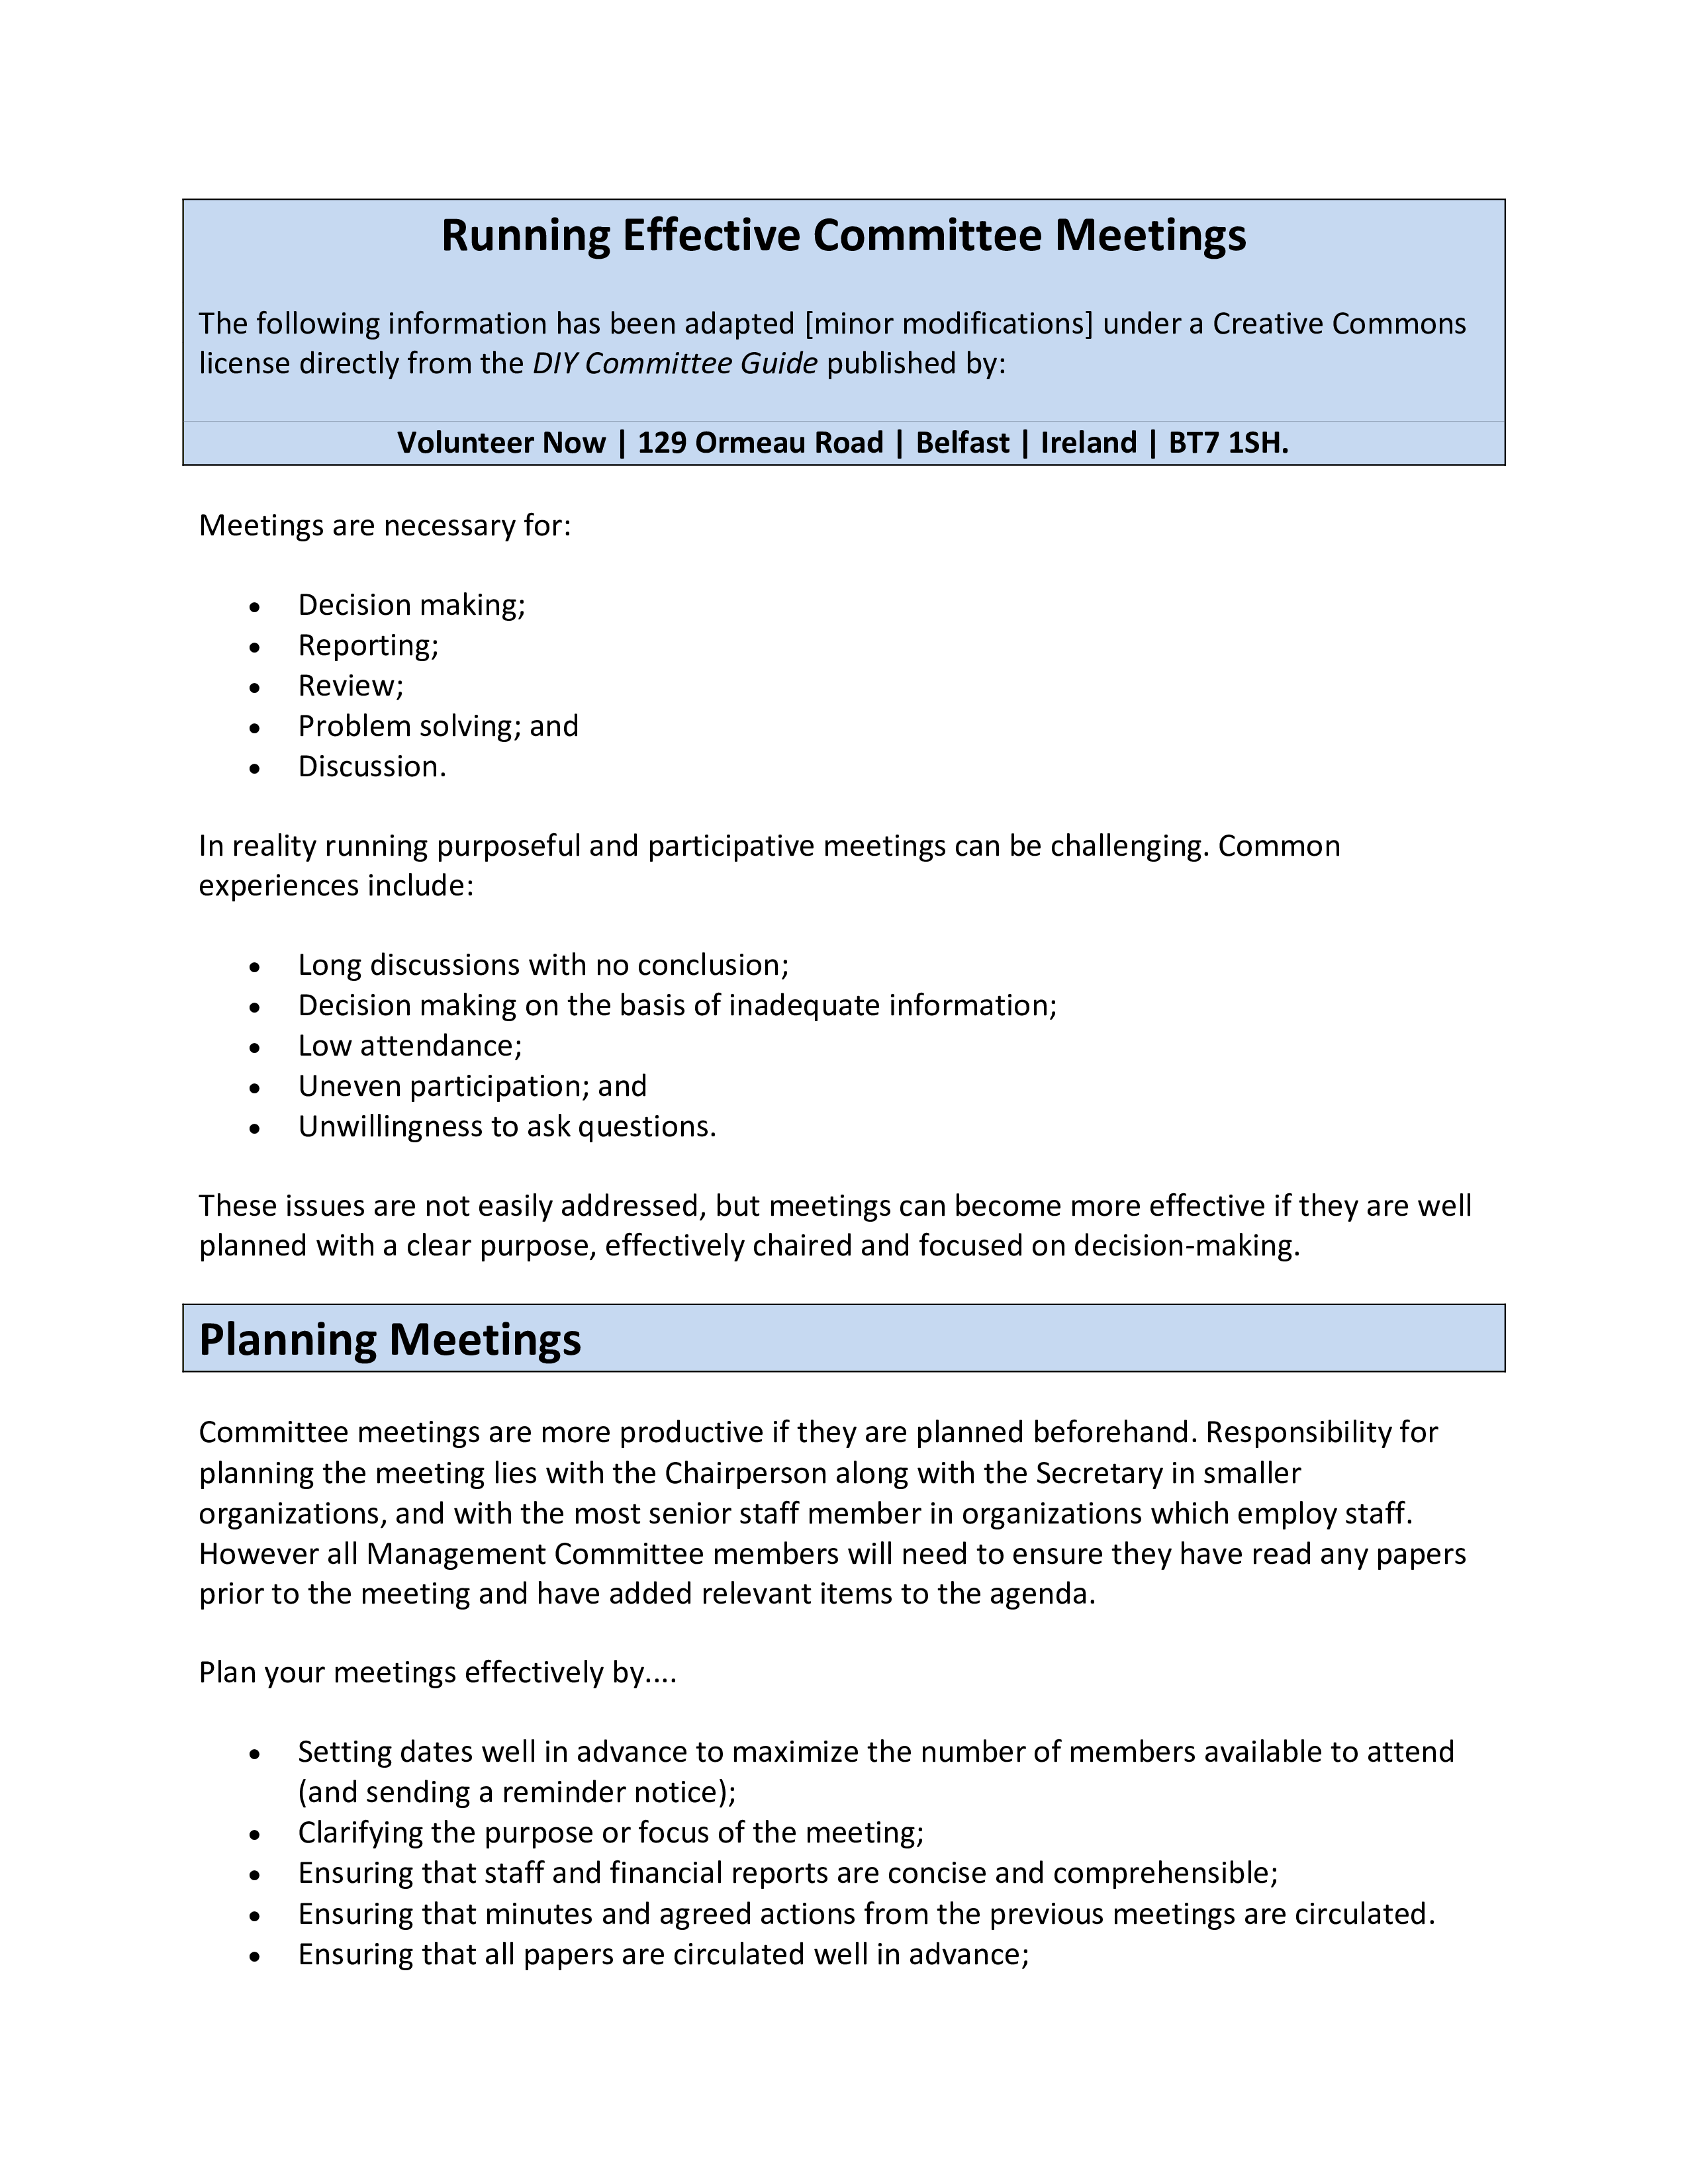 Sample Running Effective Committee Meeting Agenda Templates at